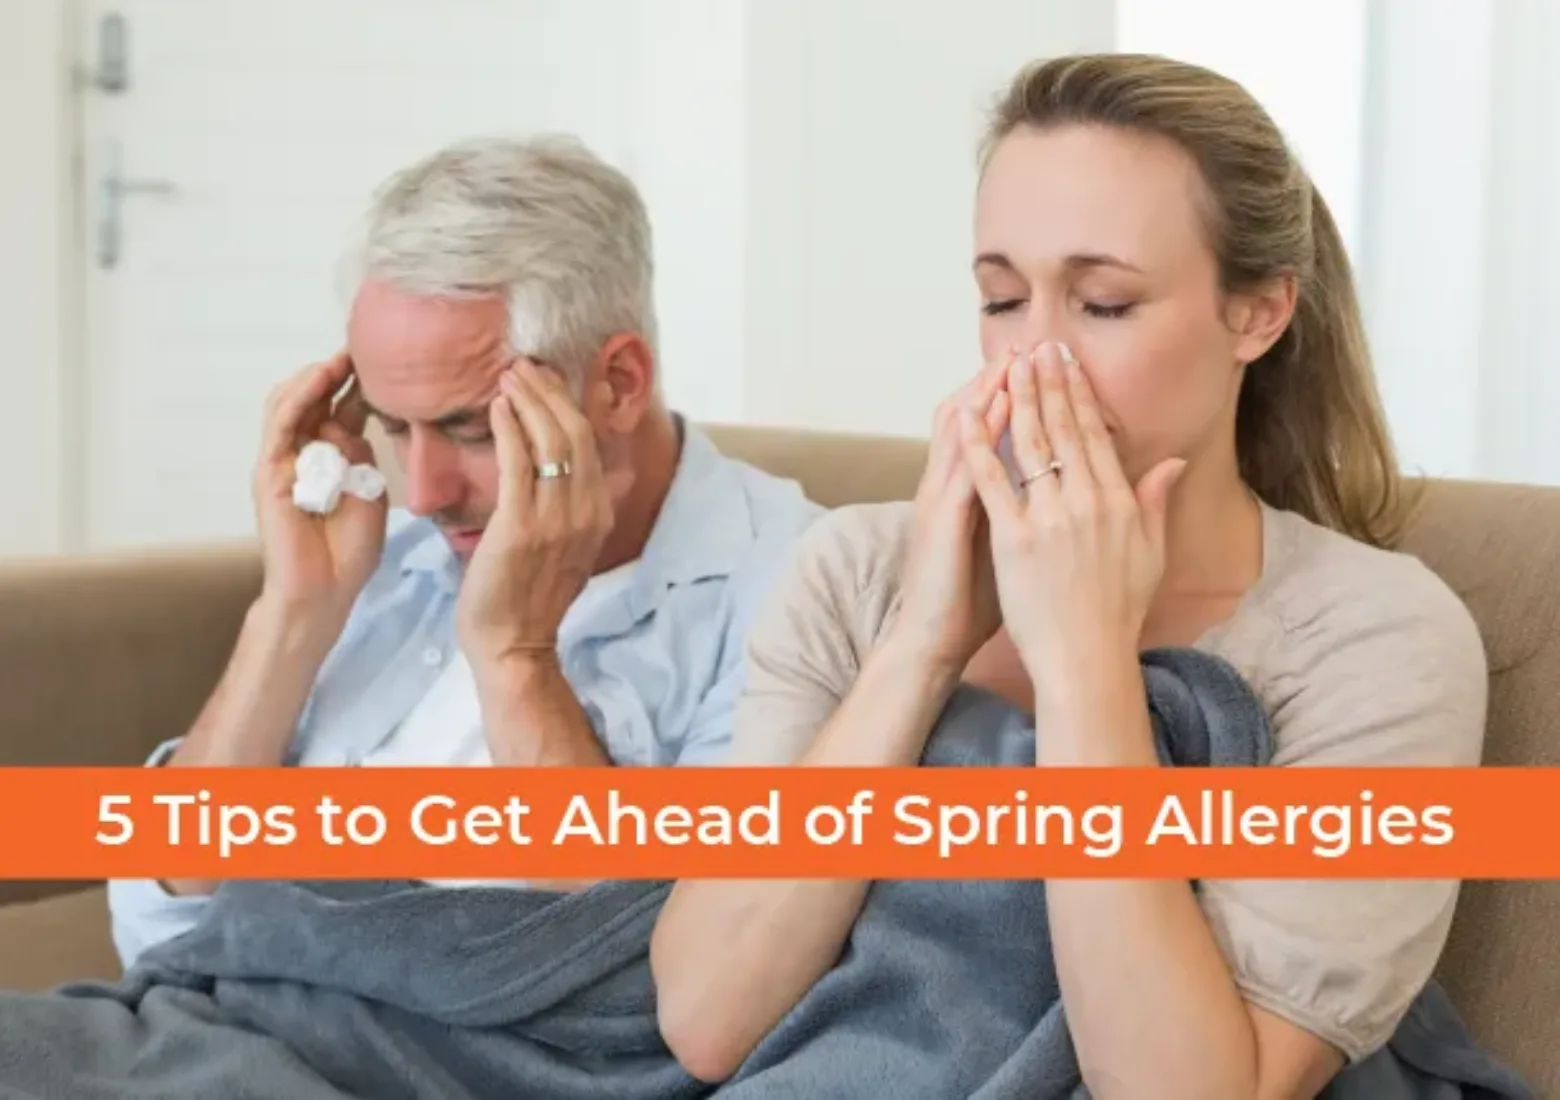 5 Tips to Prepare for the 2022 Allergy Season